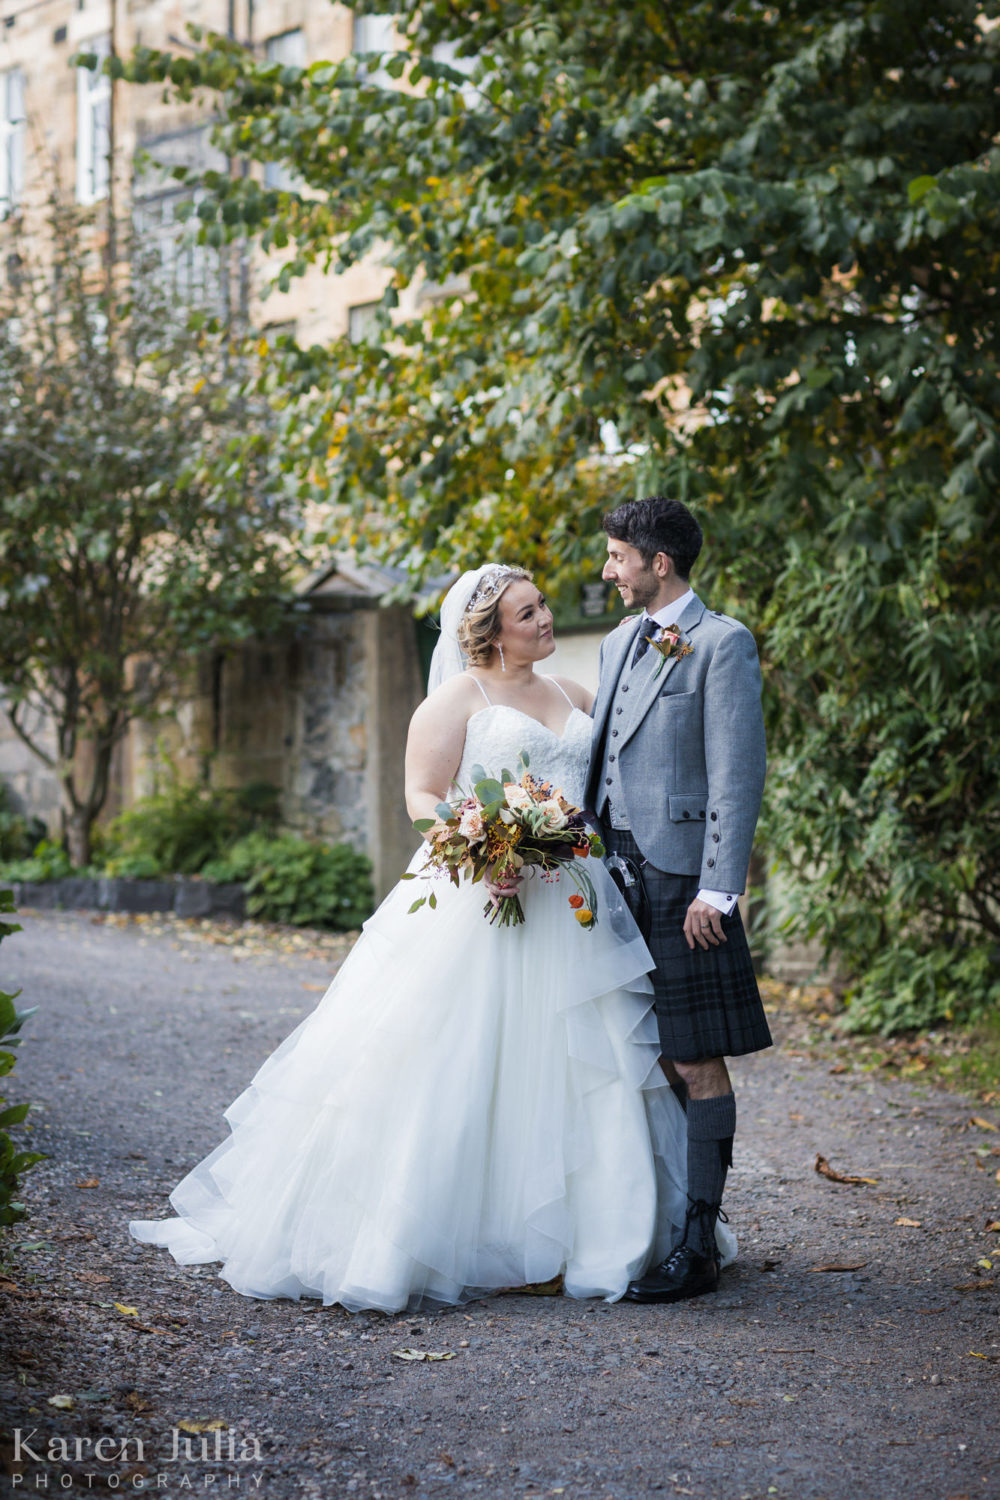 bride and groom having a moment together in Victoria Crescent Lane during their wedding day at the Bothy